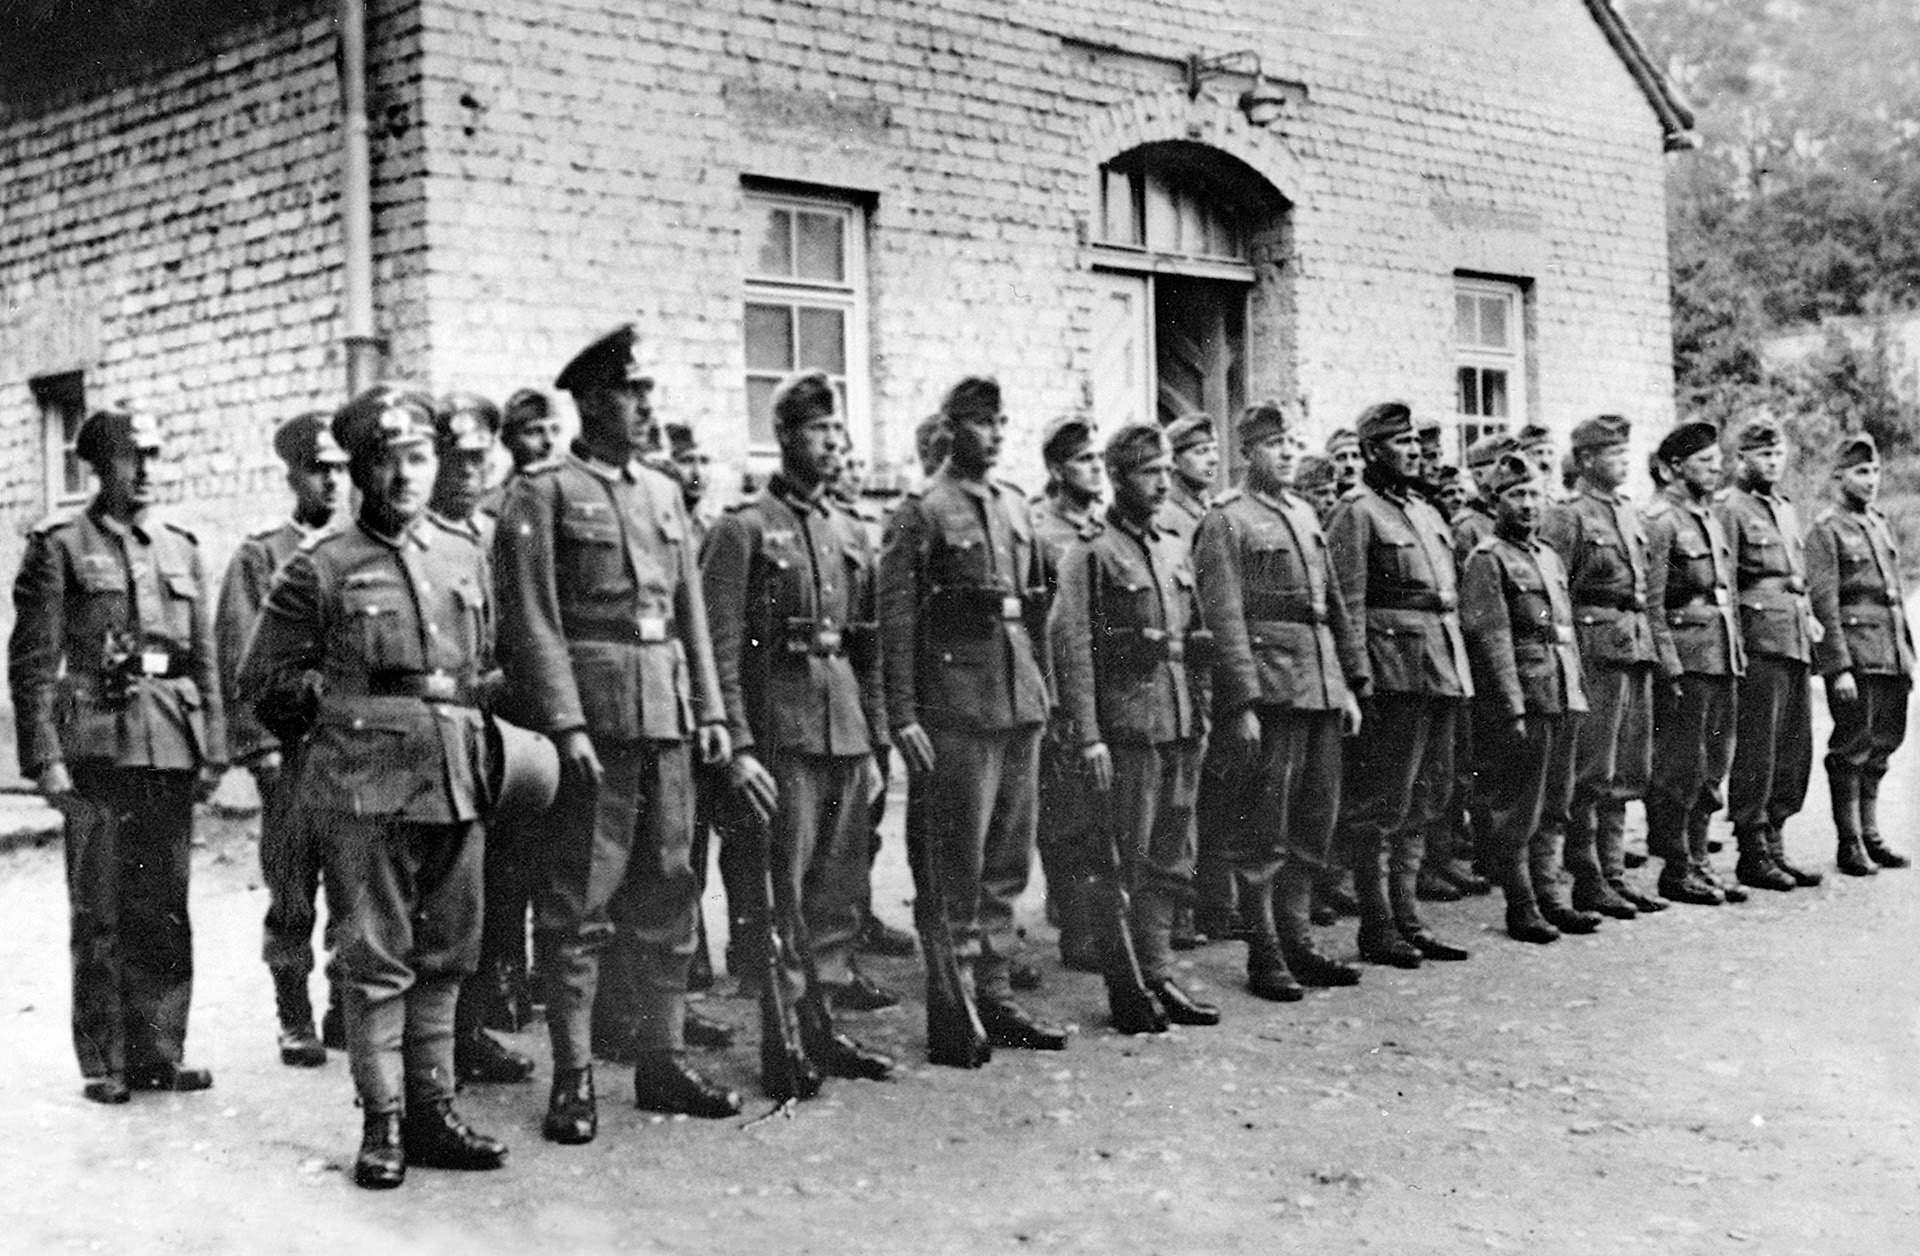 The officers and guards at Stalag IX-B in formation. Most German POW camps, while not resorts, were at least run humanely; Stalag IX-B was notorious for its harsh treatment of prisoners. 